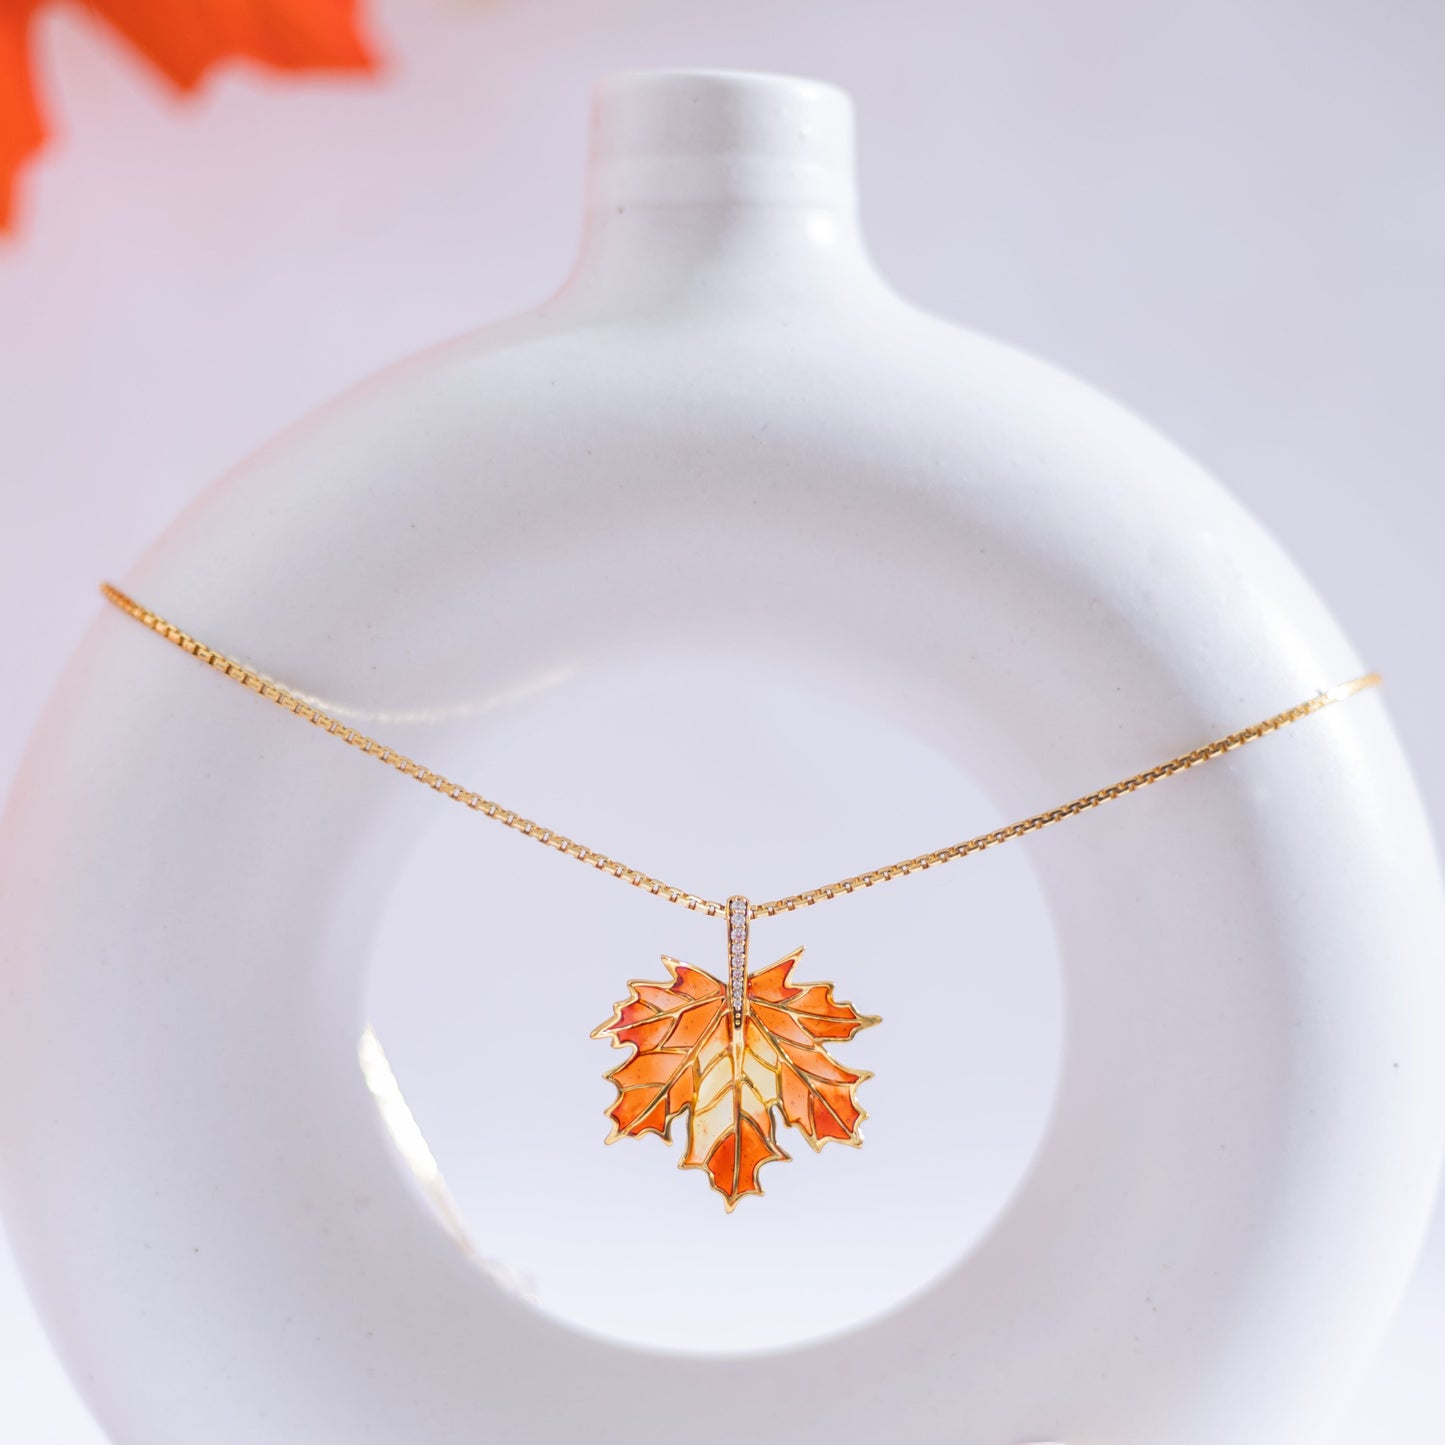 Blinging Maple Pendant with Chain